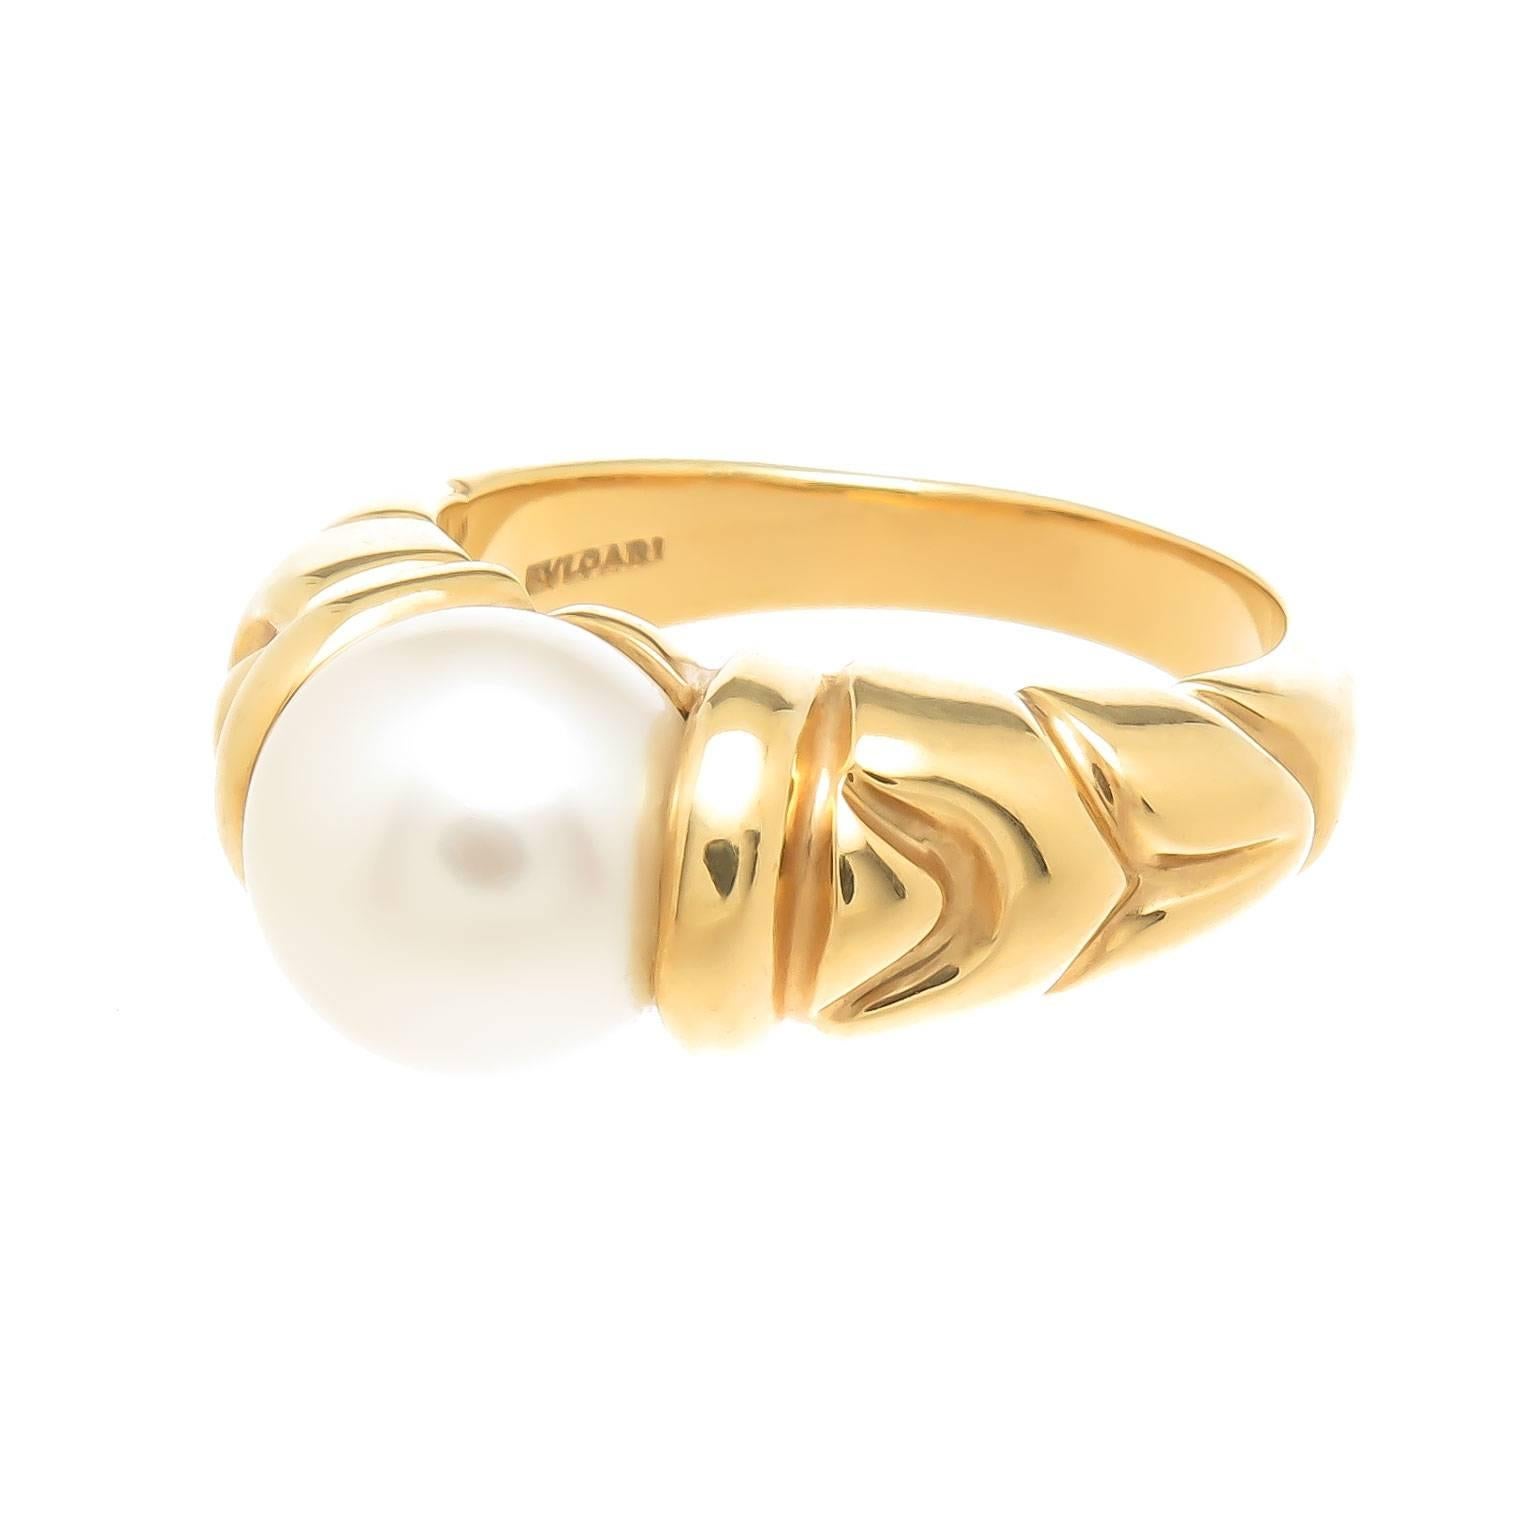 Circa 1990 Bulgari 18K Yellow Gold Ring from the Passo Doppio Collection, centrally set with a very fine Culture Pearl measuring 8.5 MM. Finger size = 6